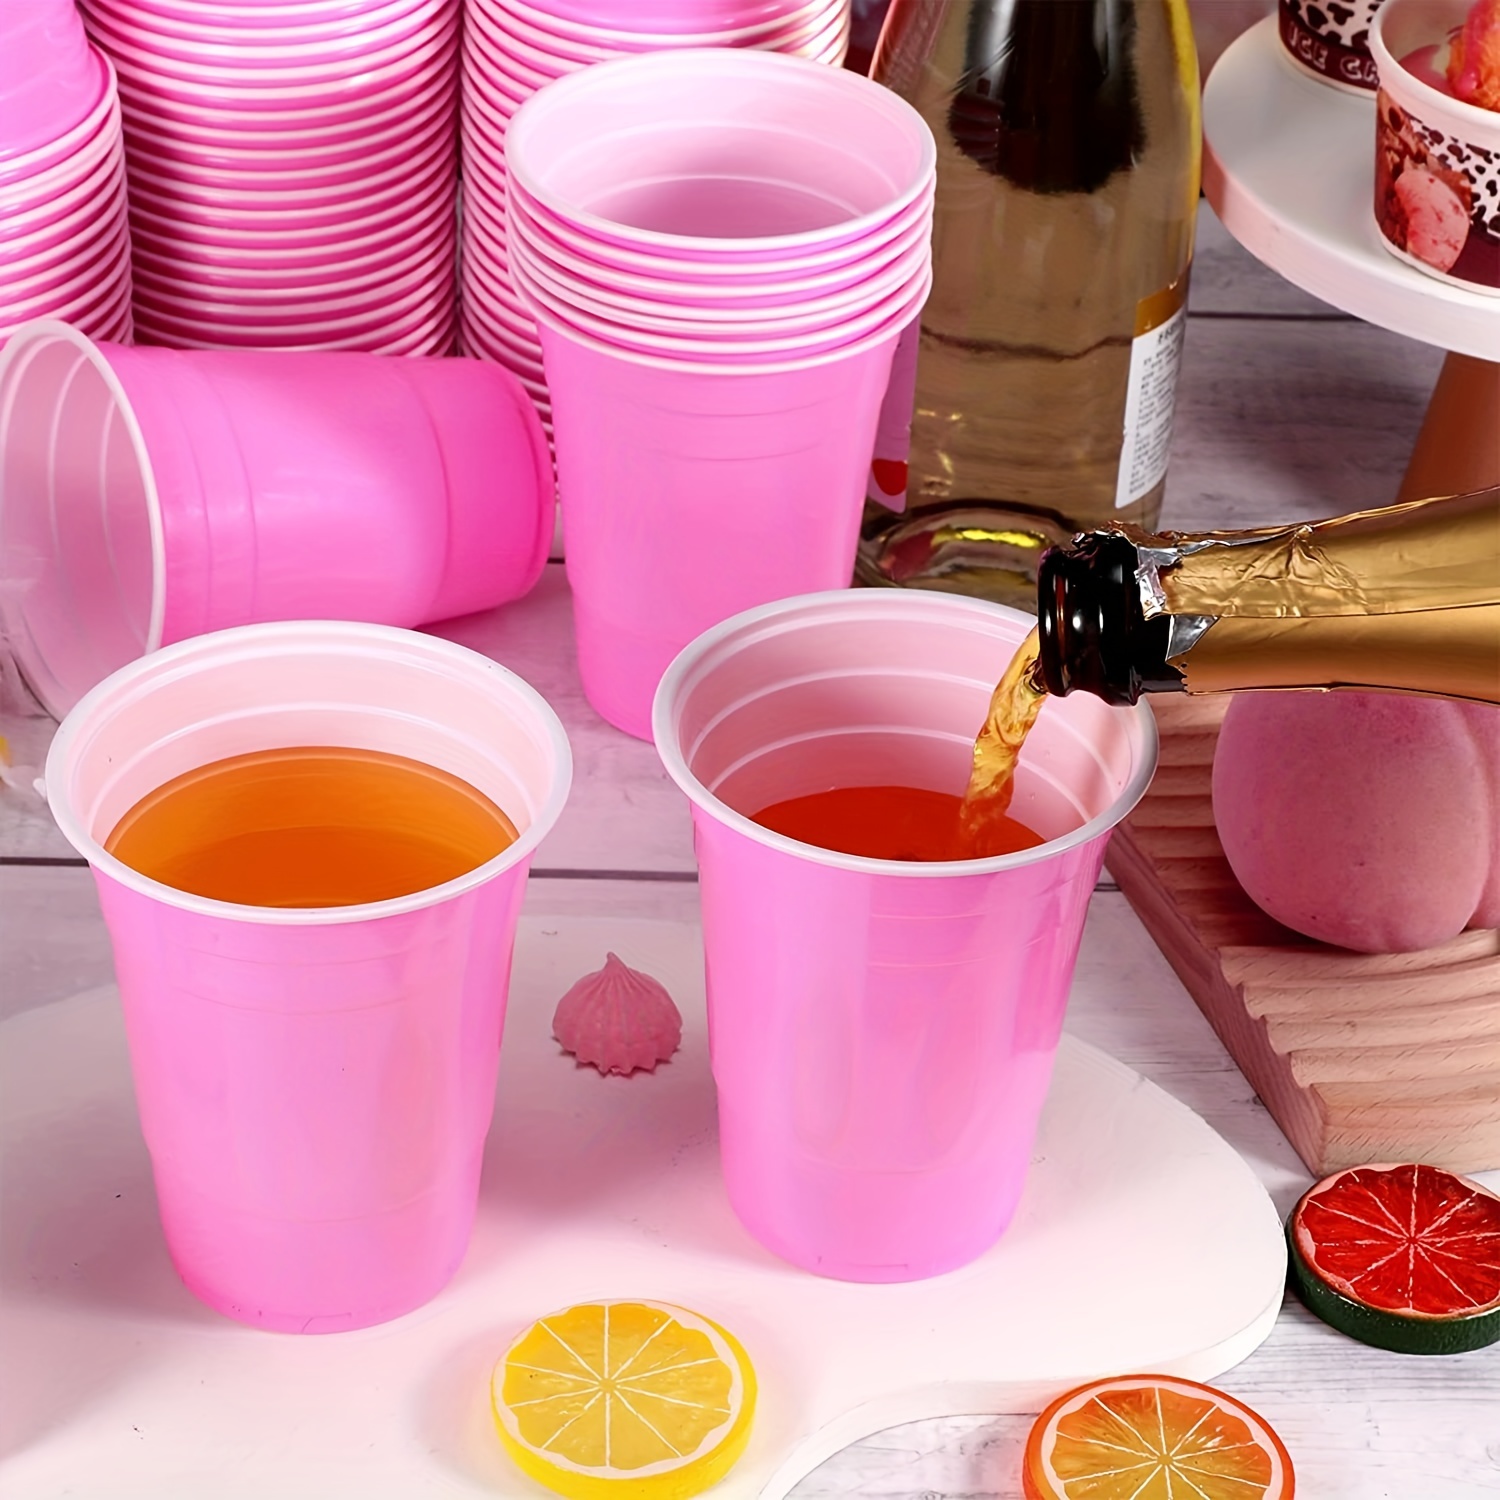 Creative Reusable Plastic Beer Pong Cups -,, - Black, Red, Blue